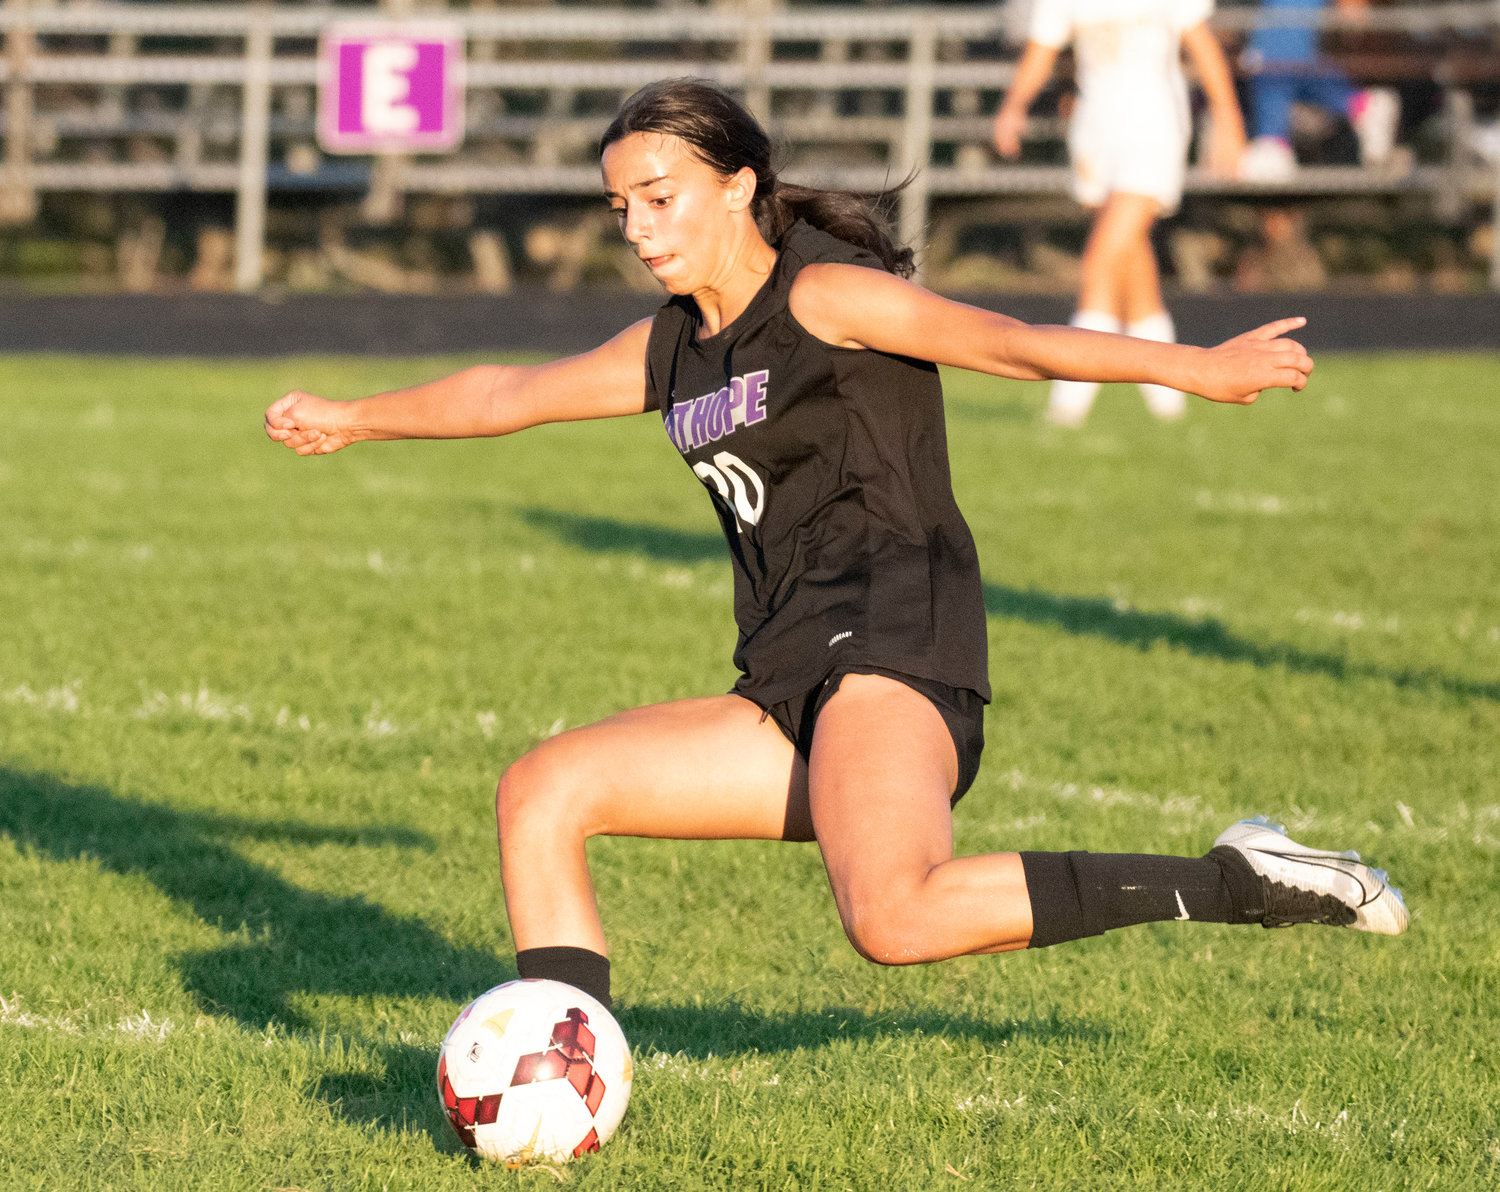 Thea Jackson was named first team All State. Jackson a freshman striker for the girls soccer team was the Division I scoring leader with 23 goals and 8 assists.